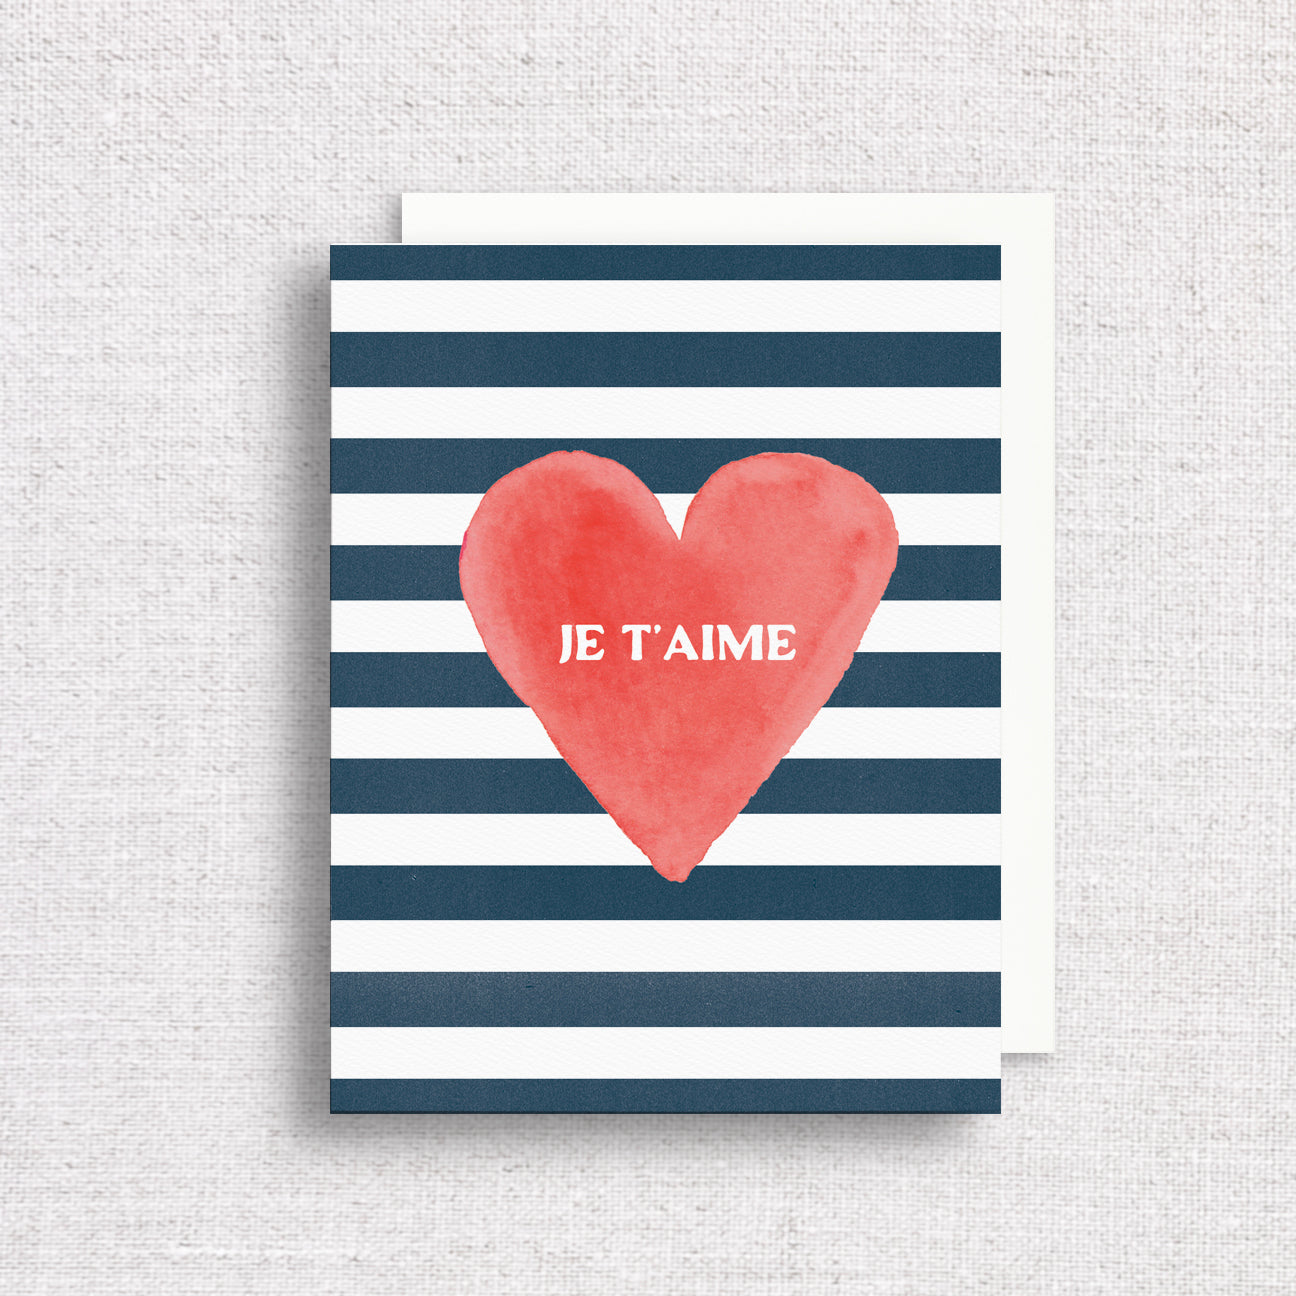 Je T'aime Greeting Card by Gert & Co